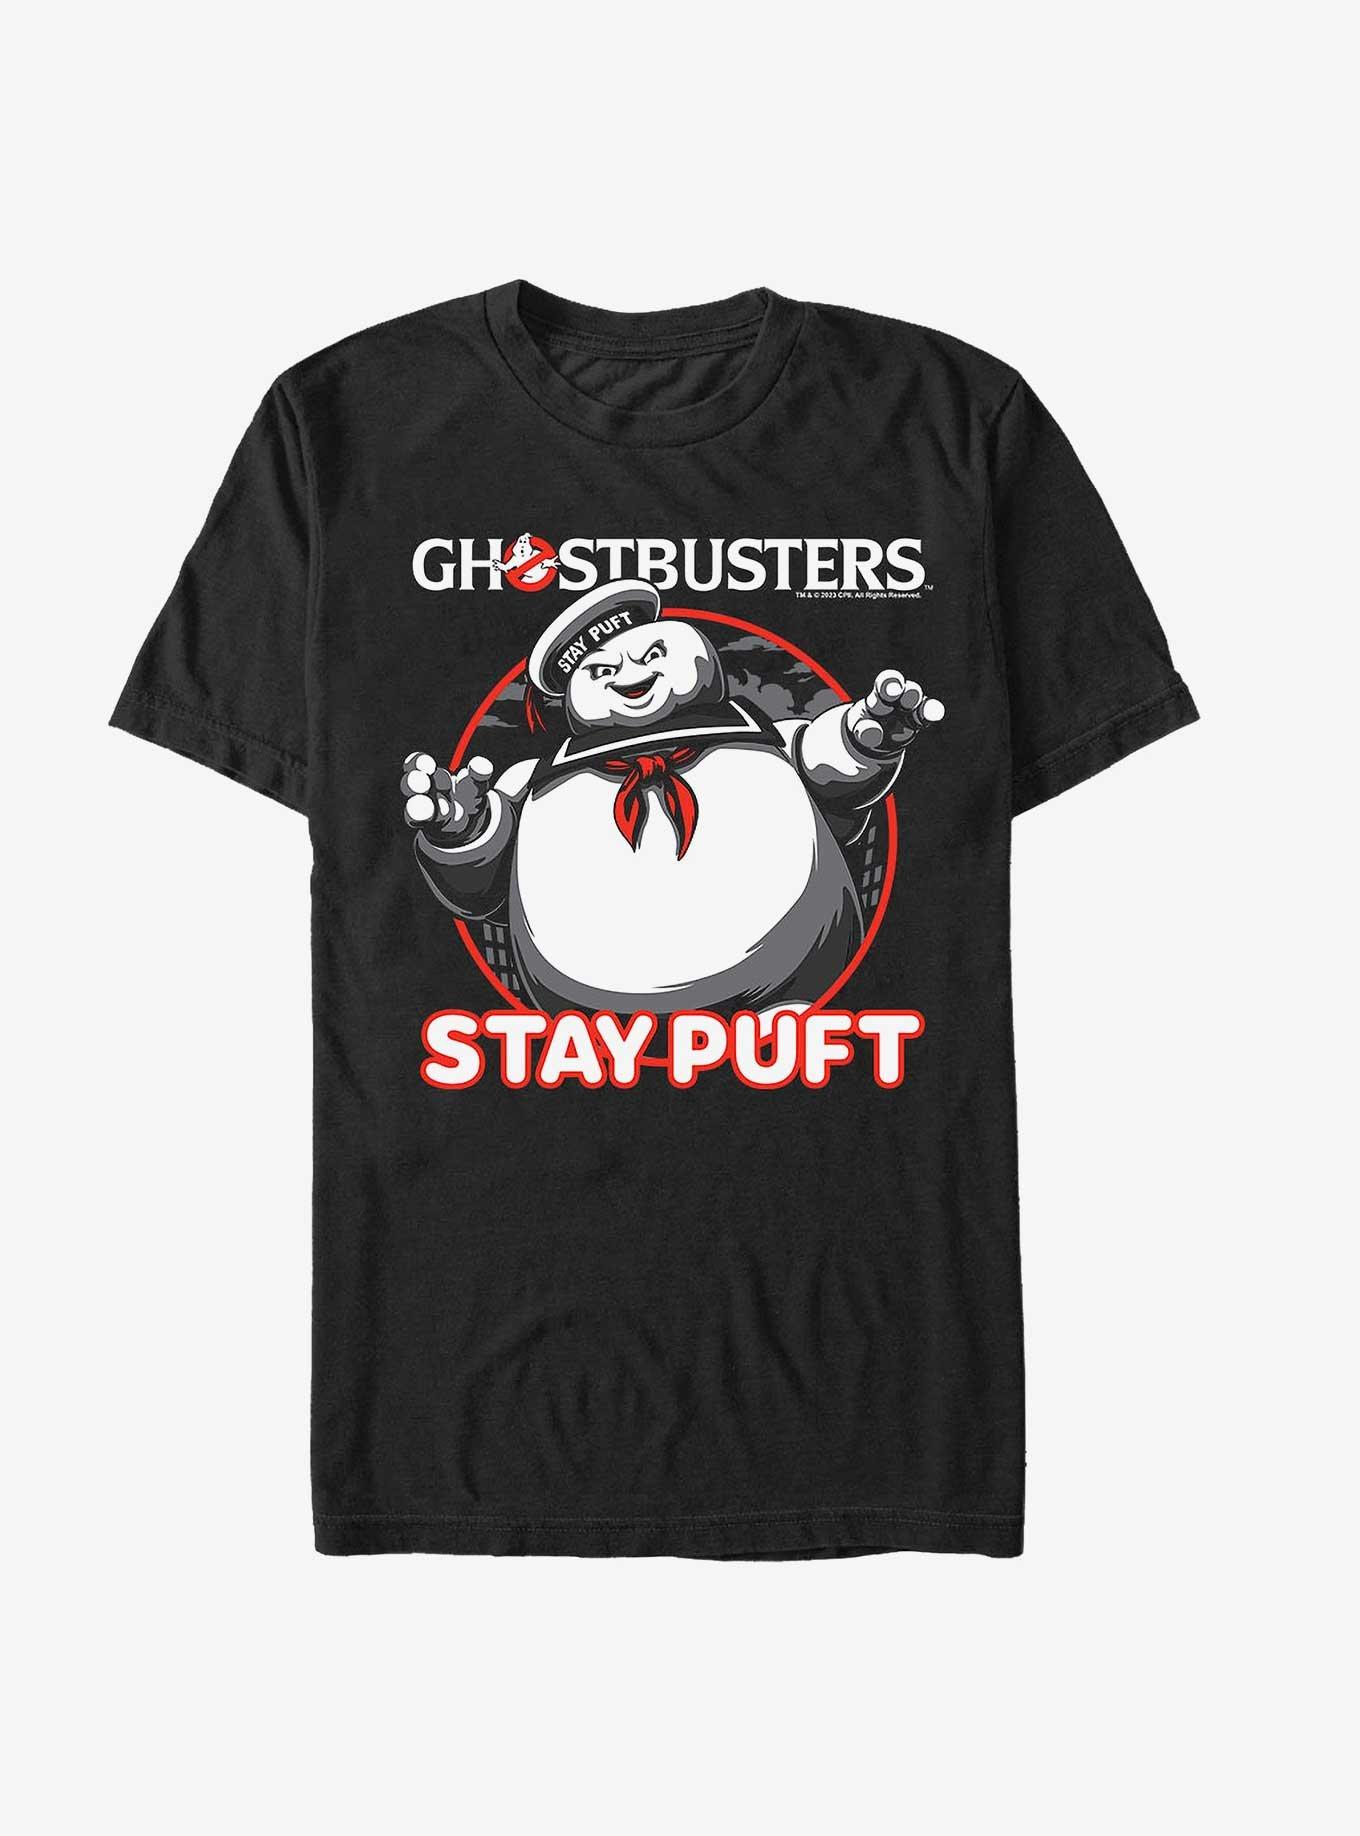 Ghostbusters Stay Puft Classic T-Shirt, BLACK, hi-res